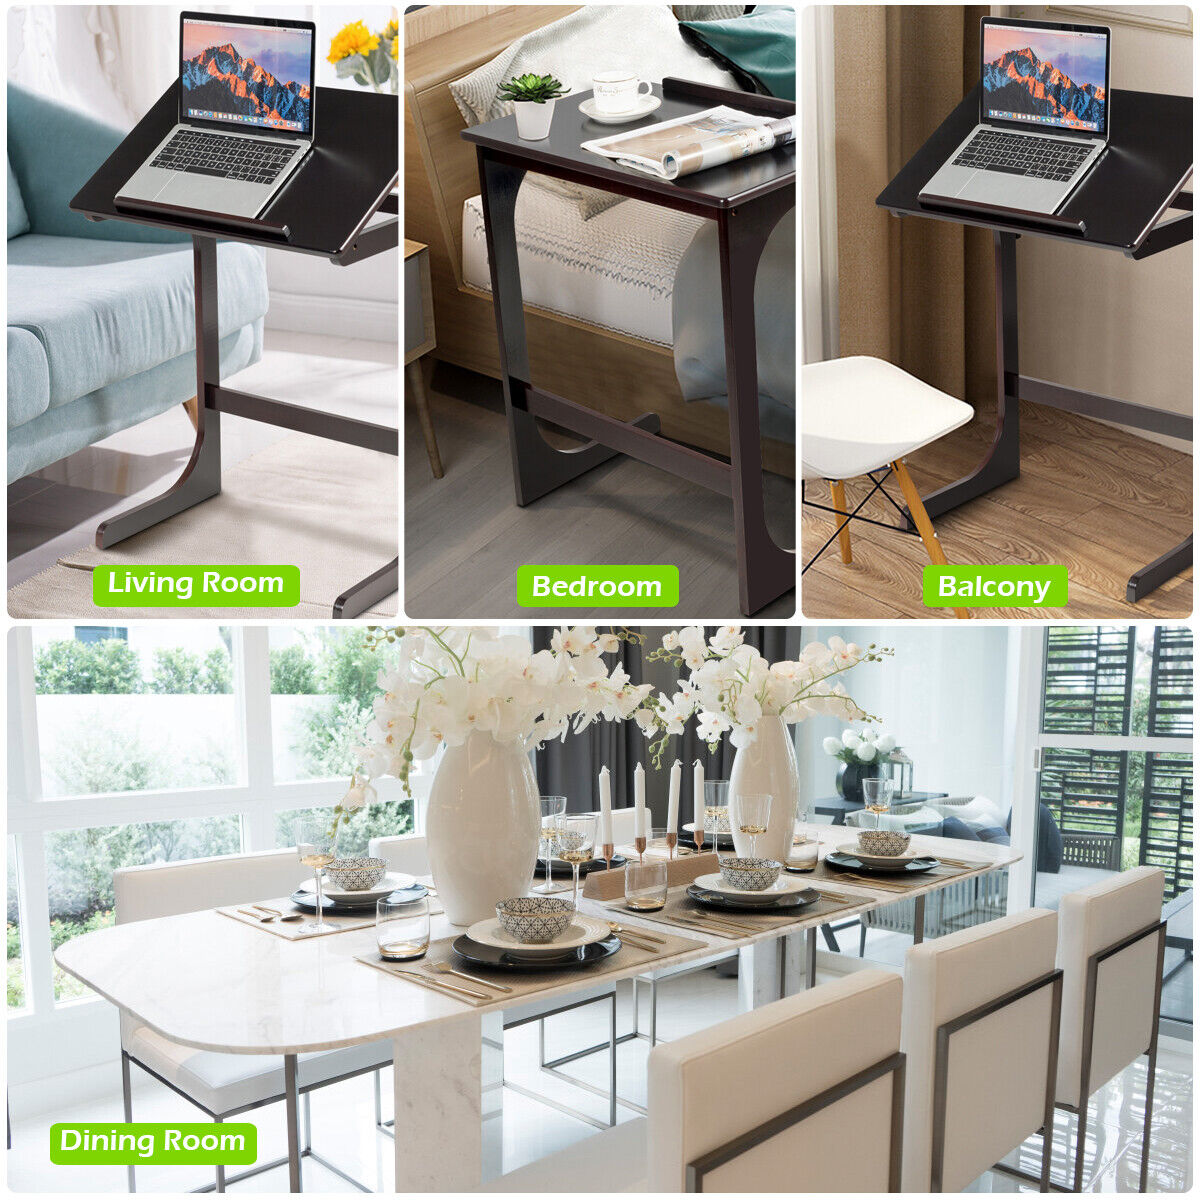 TV Tray With Titling Top - C Shape Bamboo Laptop Desk 